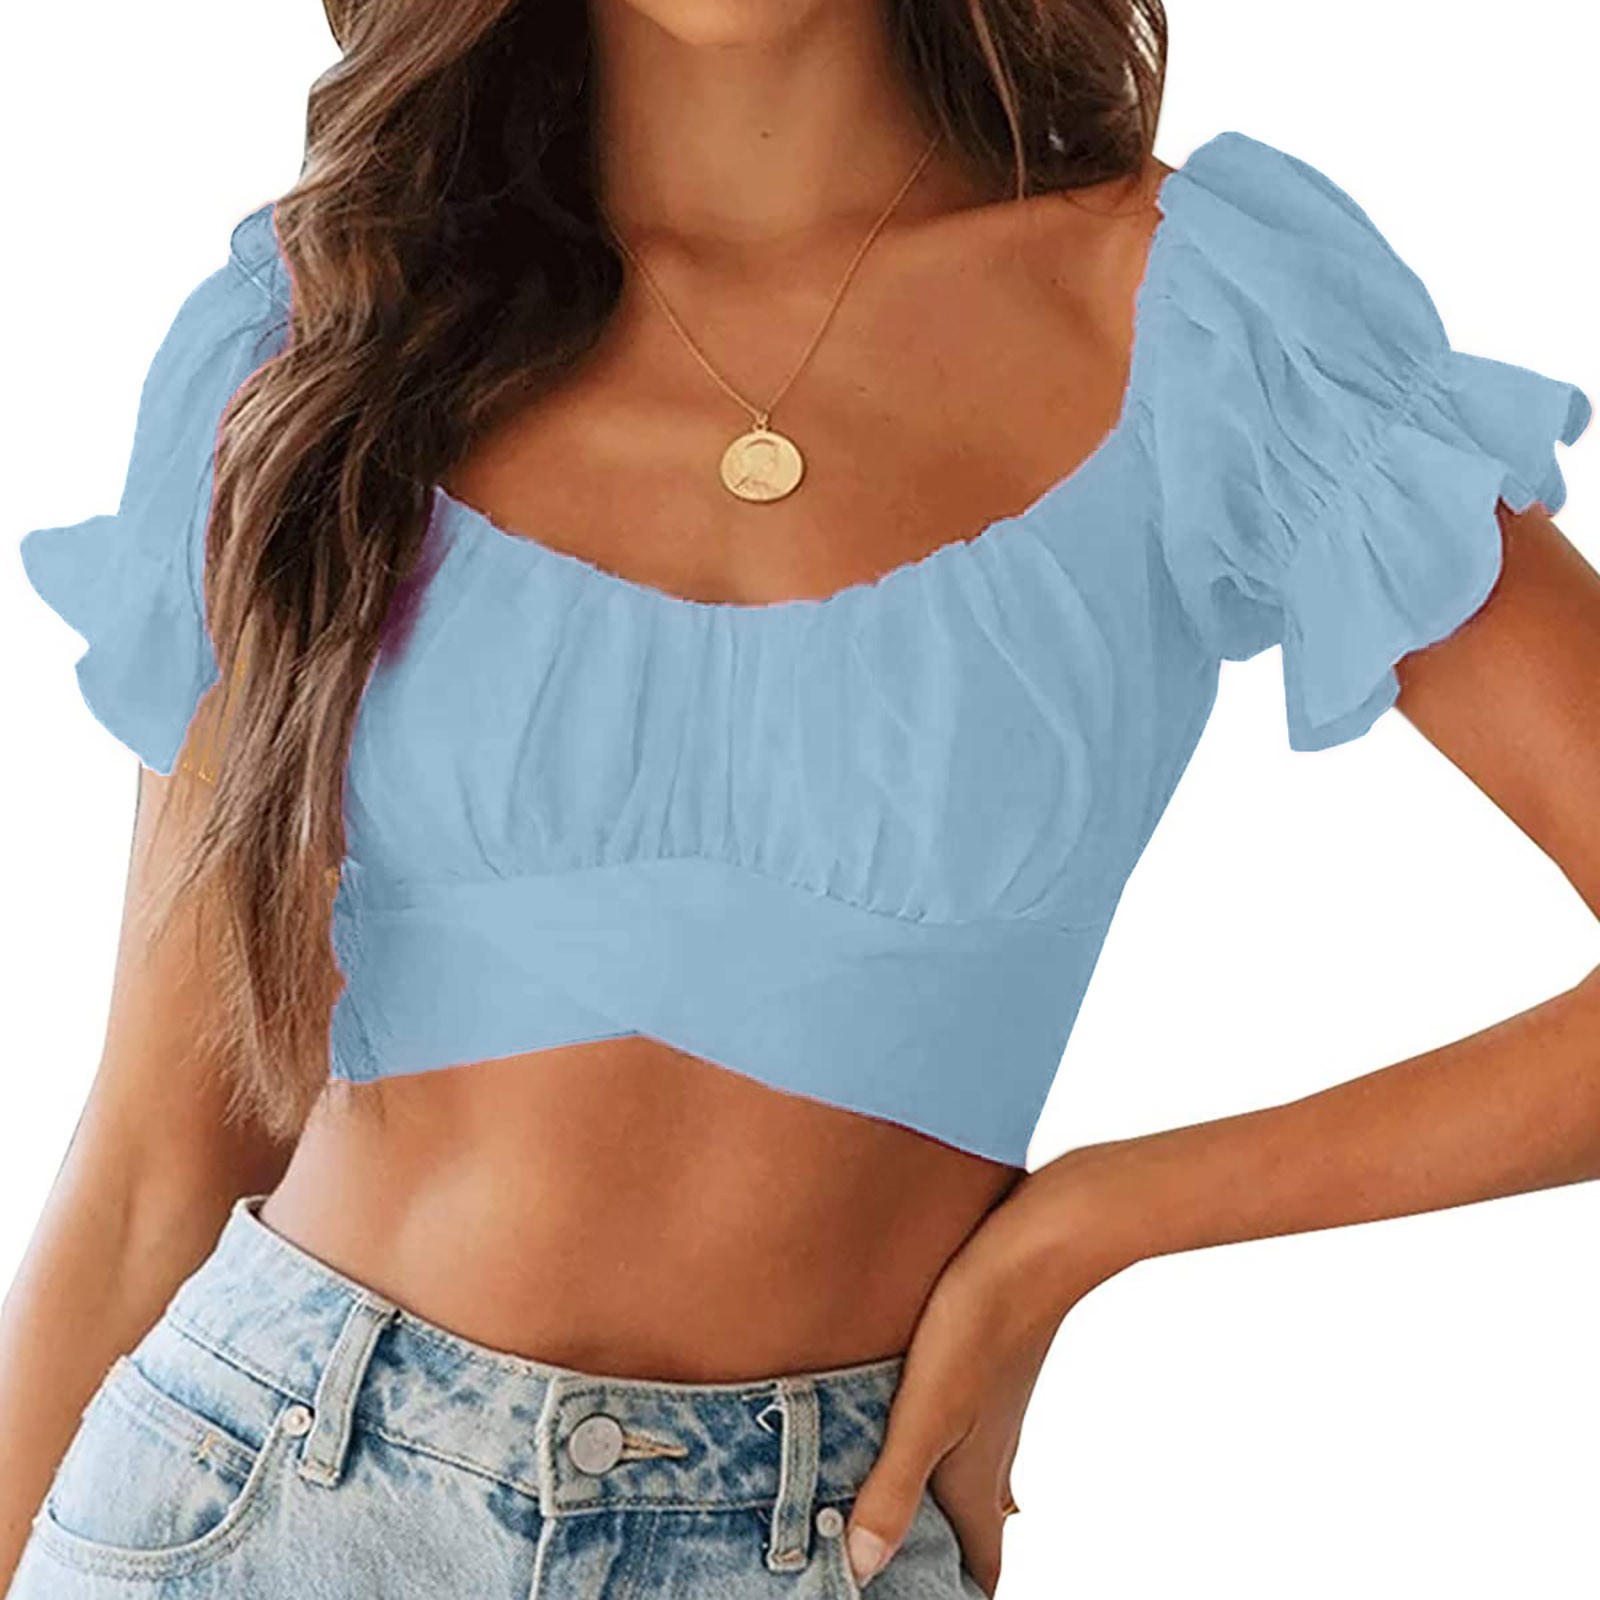 Women's Off Shoulder Crop Top Floral Print Strapless Short Sleeve V Neck Blouses Sexy Crisscross Cropped Tee Shirt - image 4 of 8